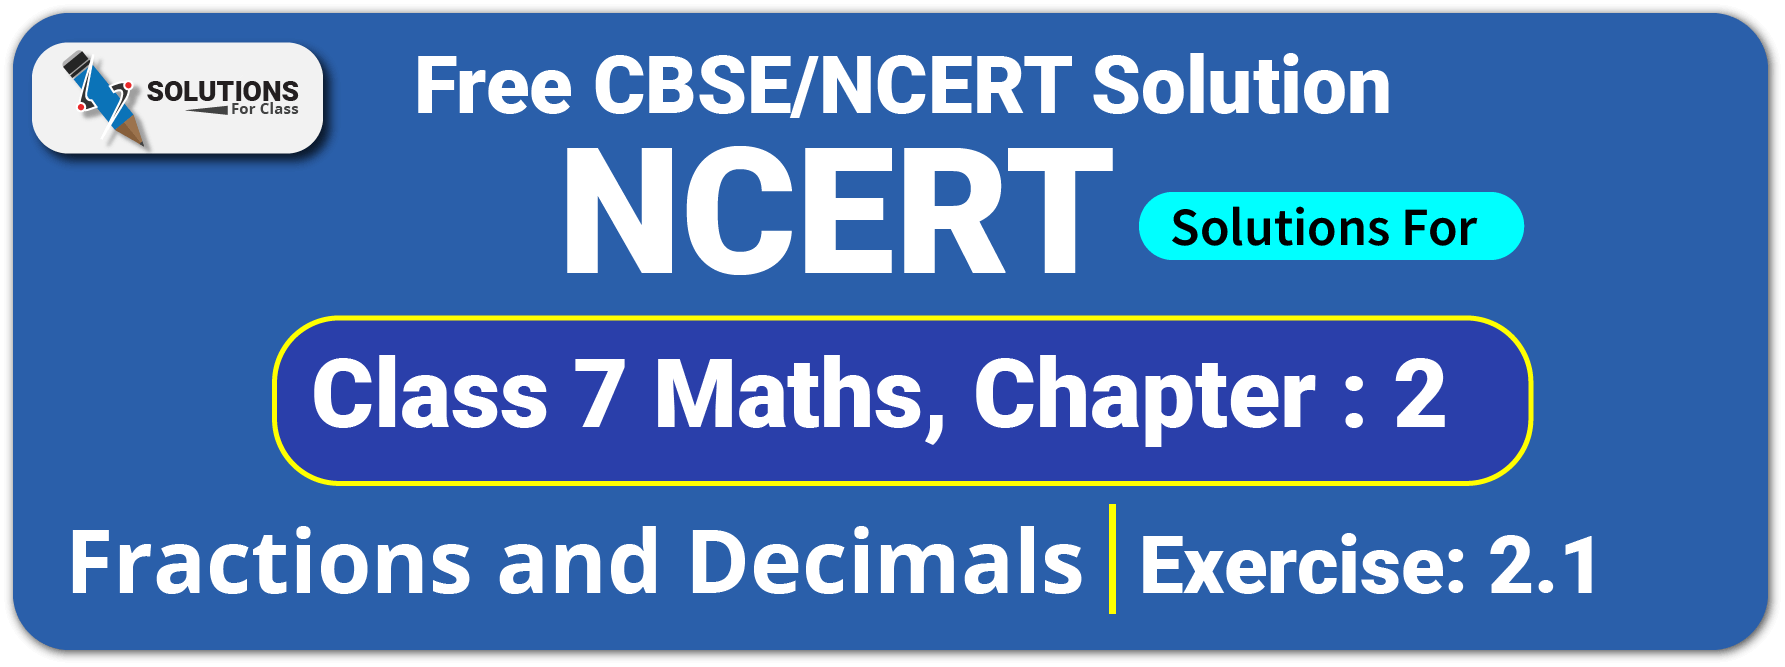 NCERT Solutions For Class 7 Chapter 2, Fractions and Decimals, Exercise 2.1